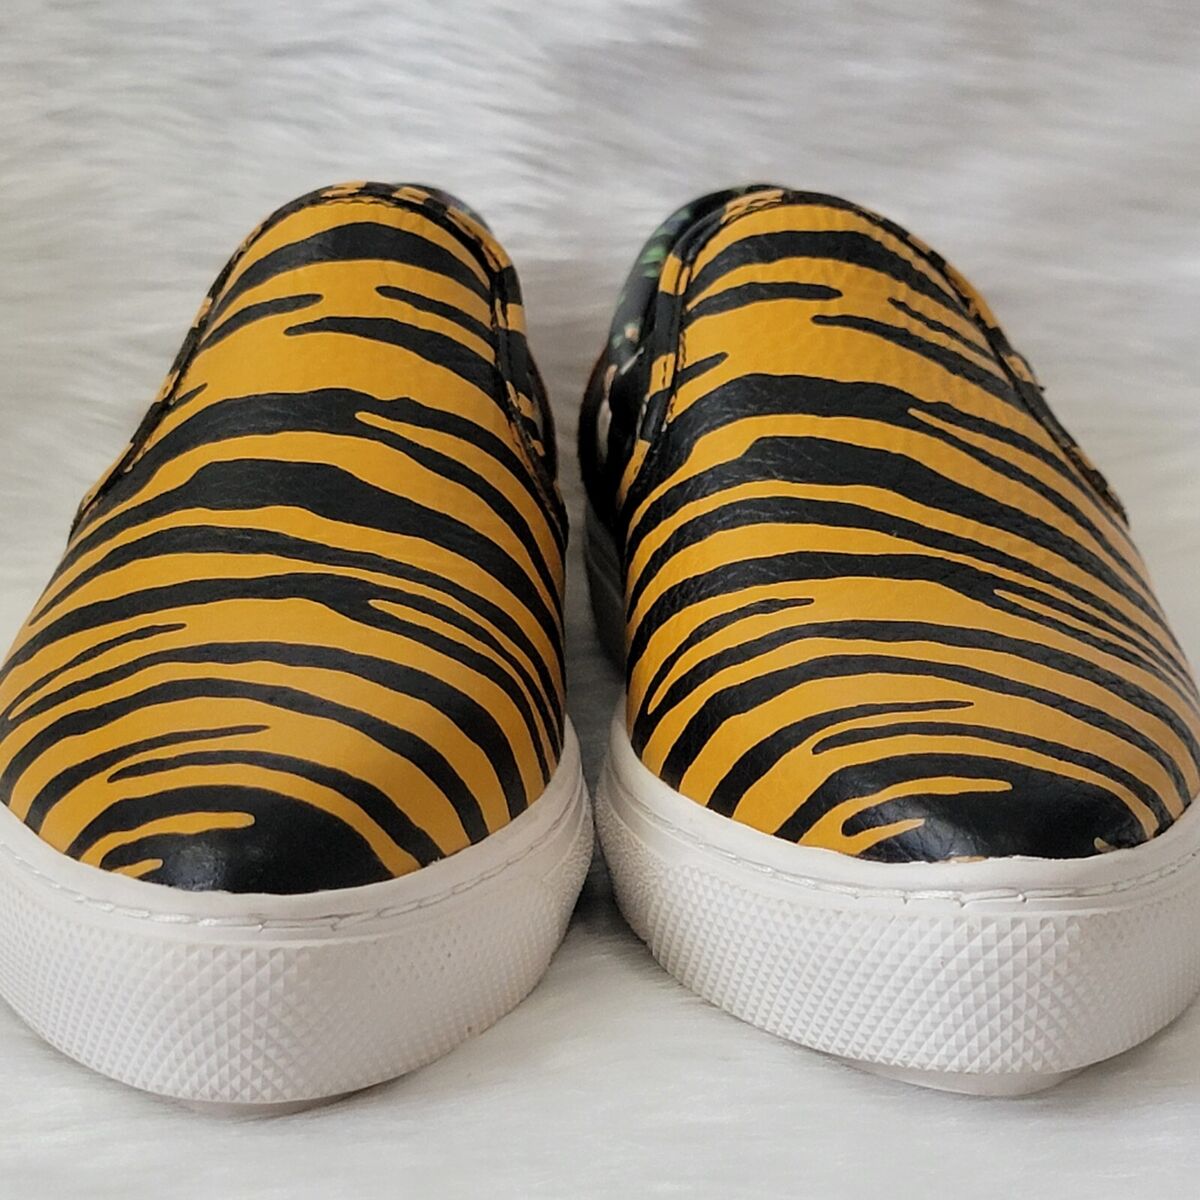 Embrace the Wild Side: Tiger Print Shoes - Roaring Style for Your Ward ...